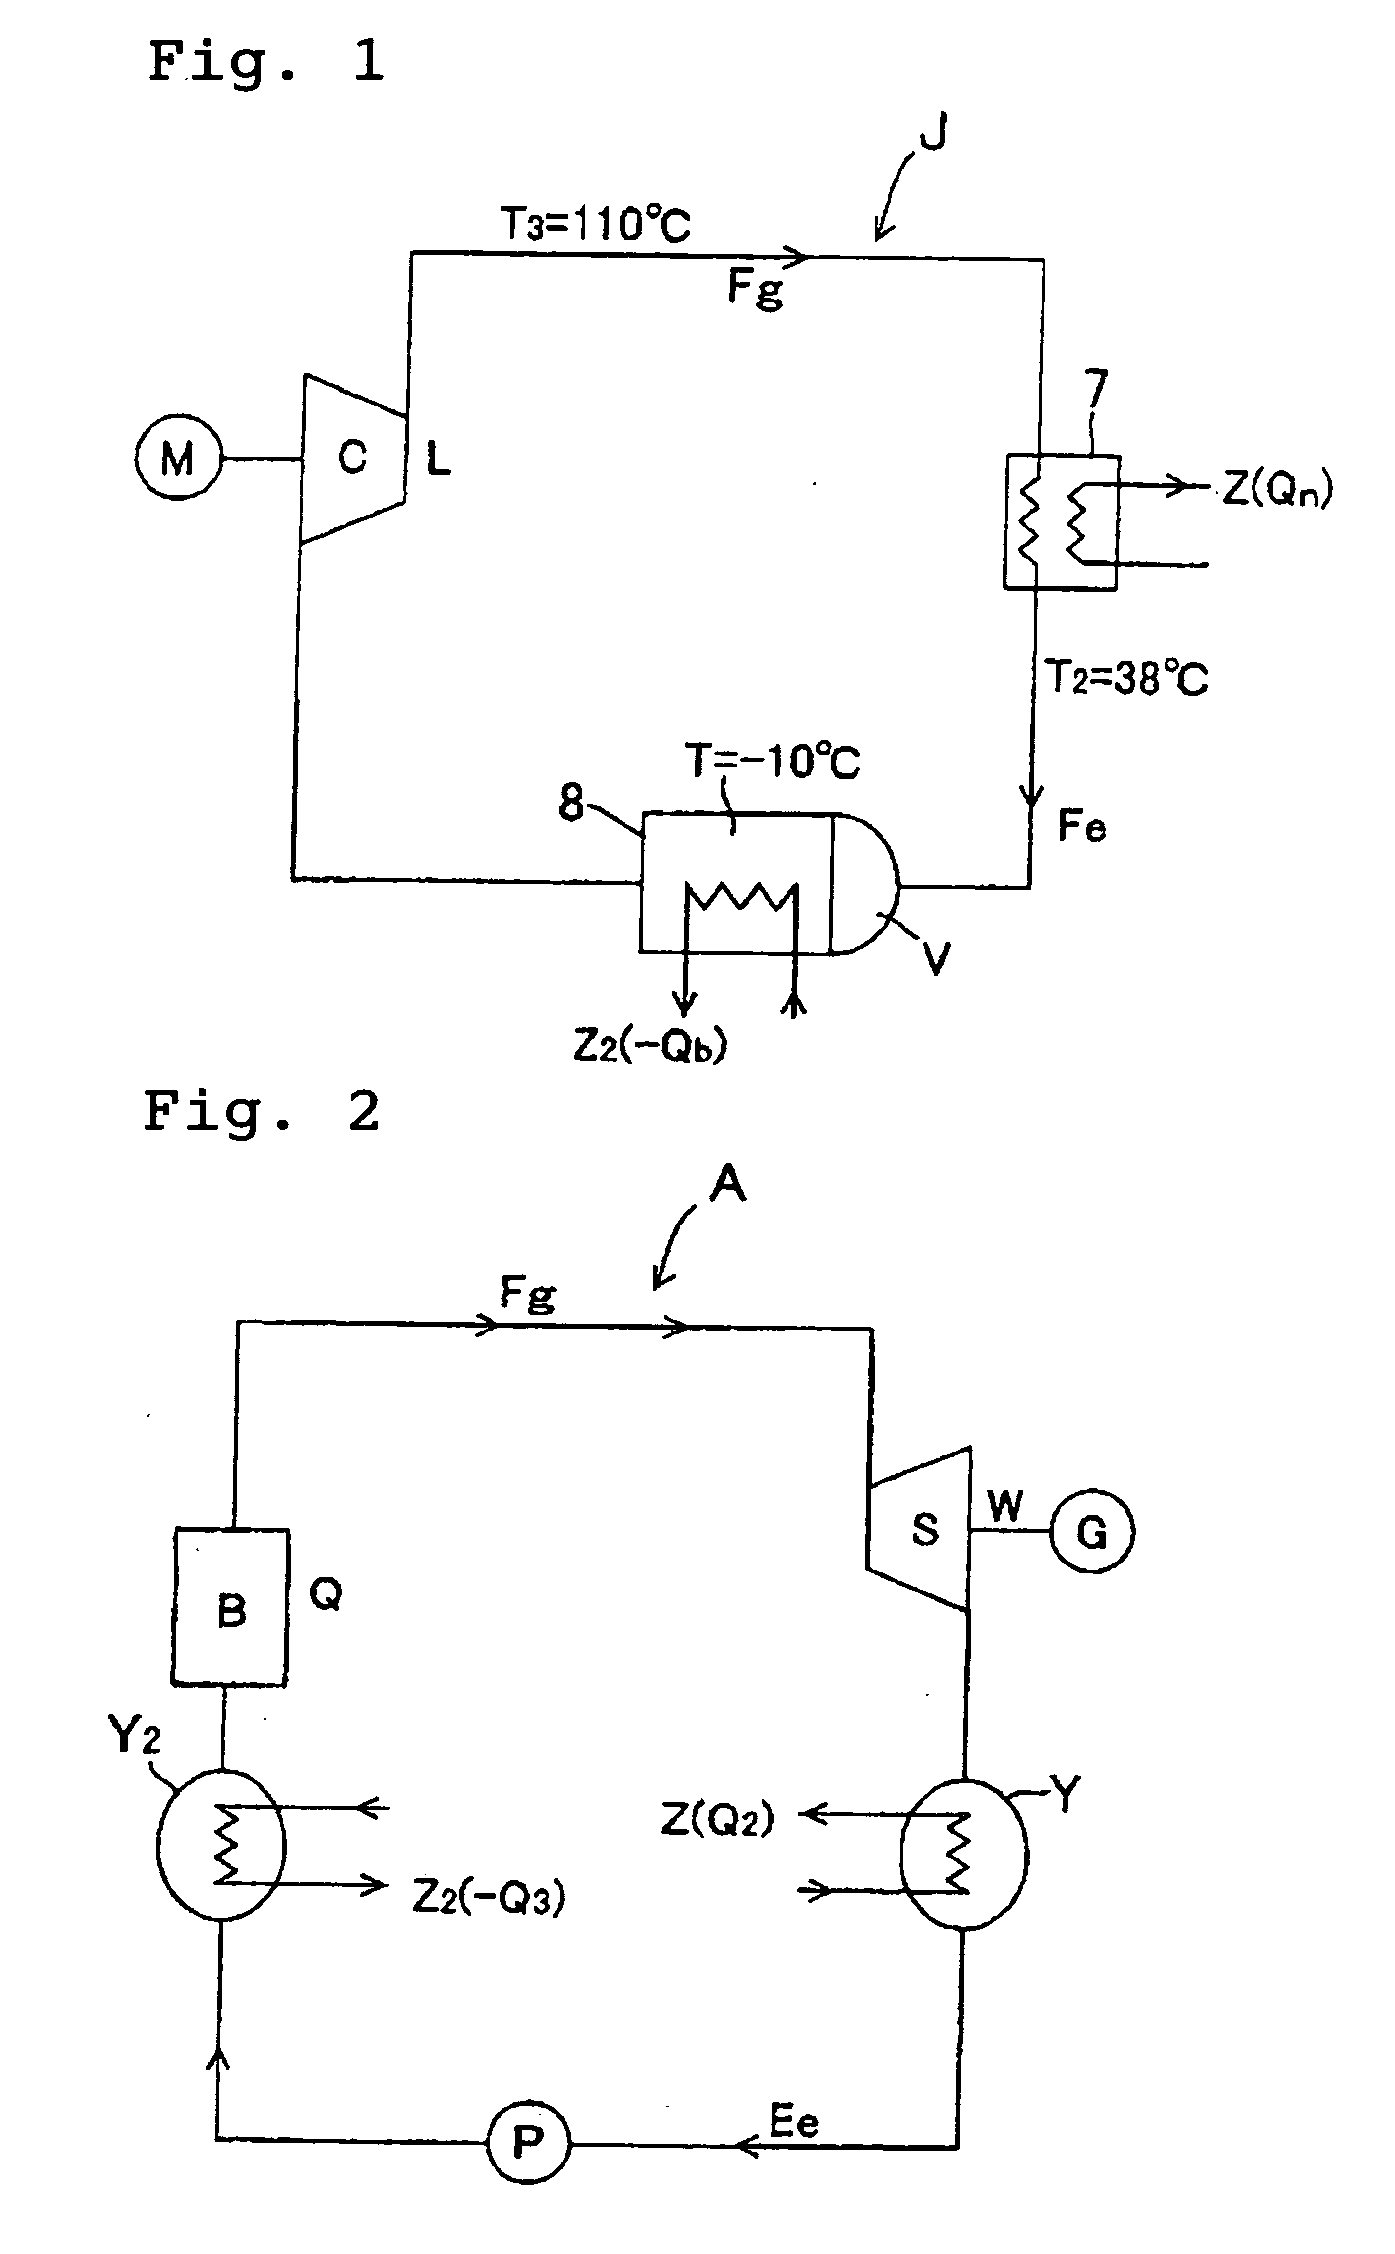 Heat Cycle System and Composite Heat Cycle Electric Power Generation System